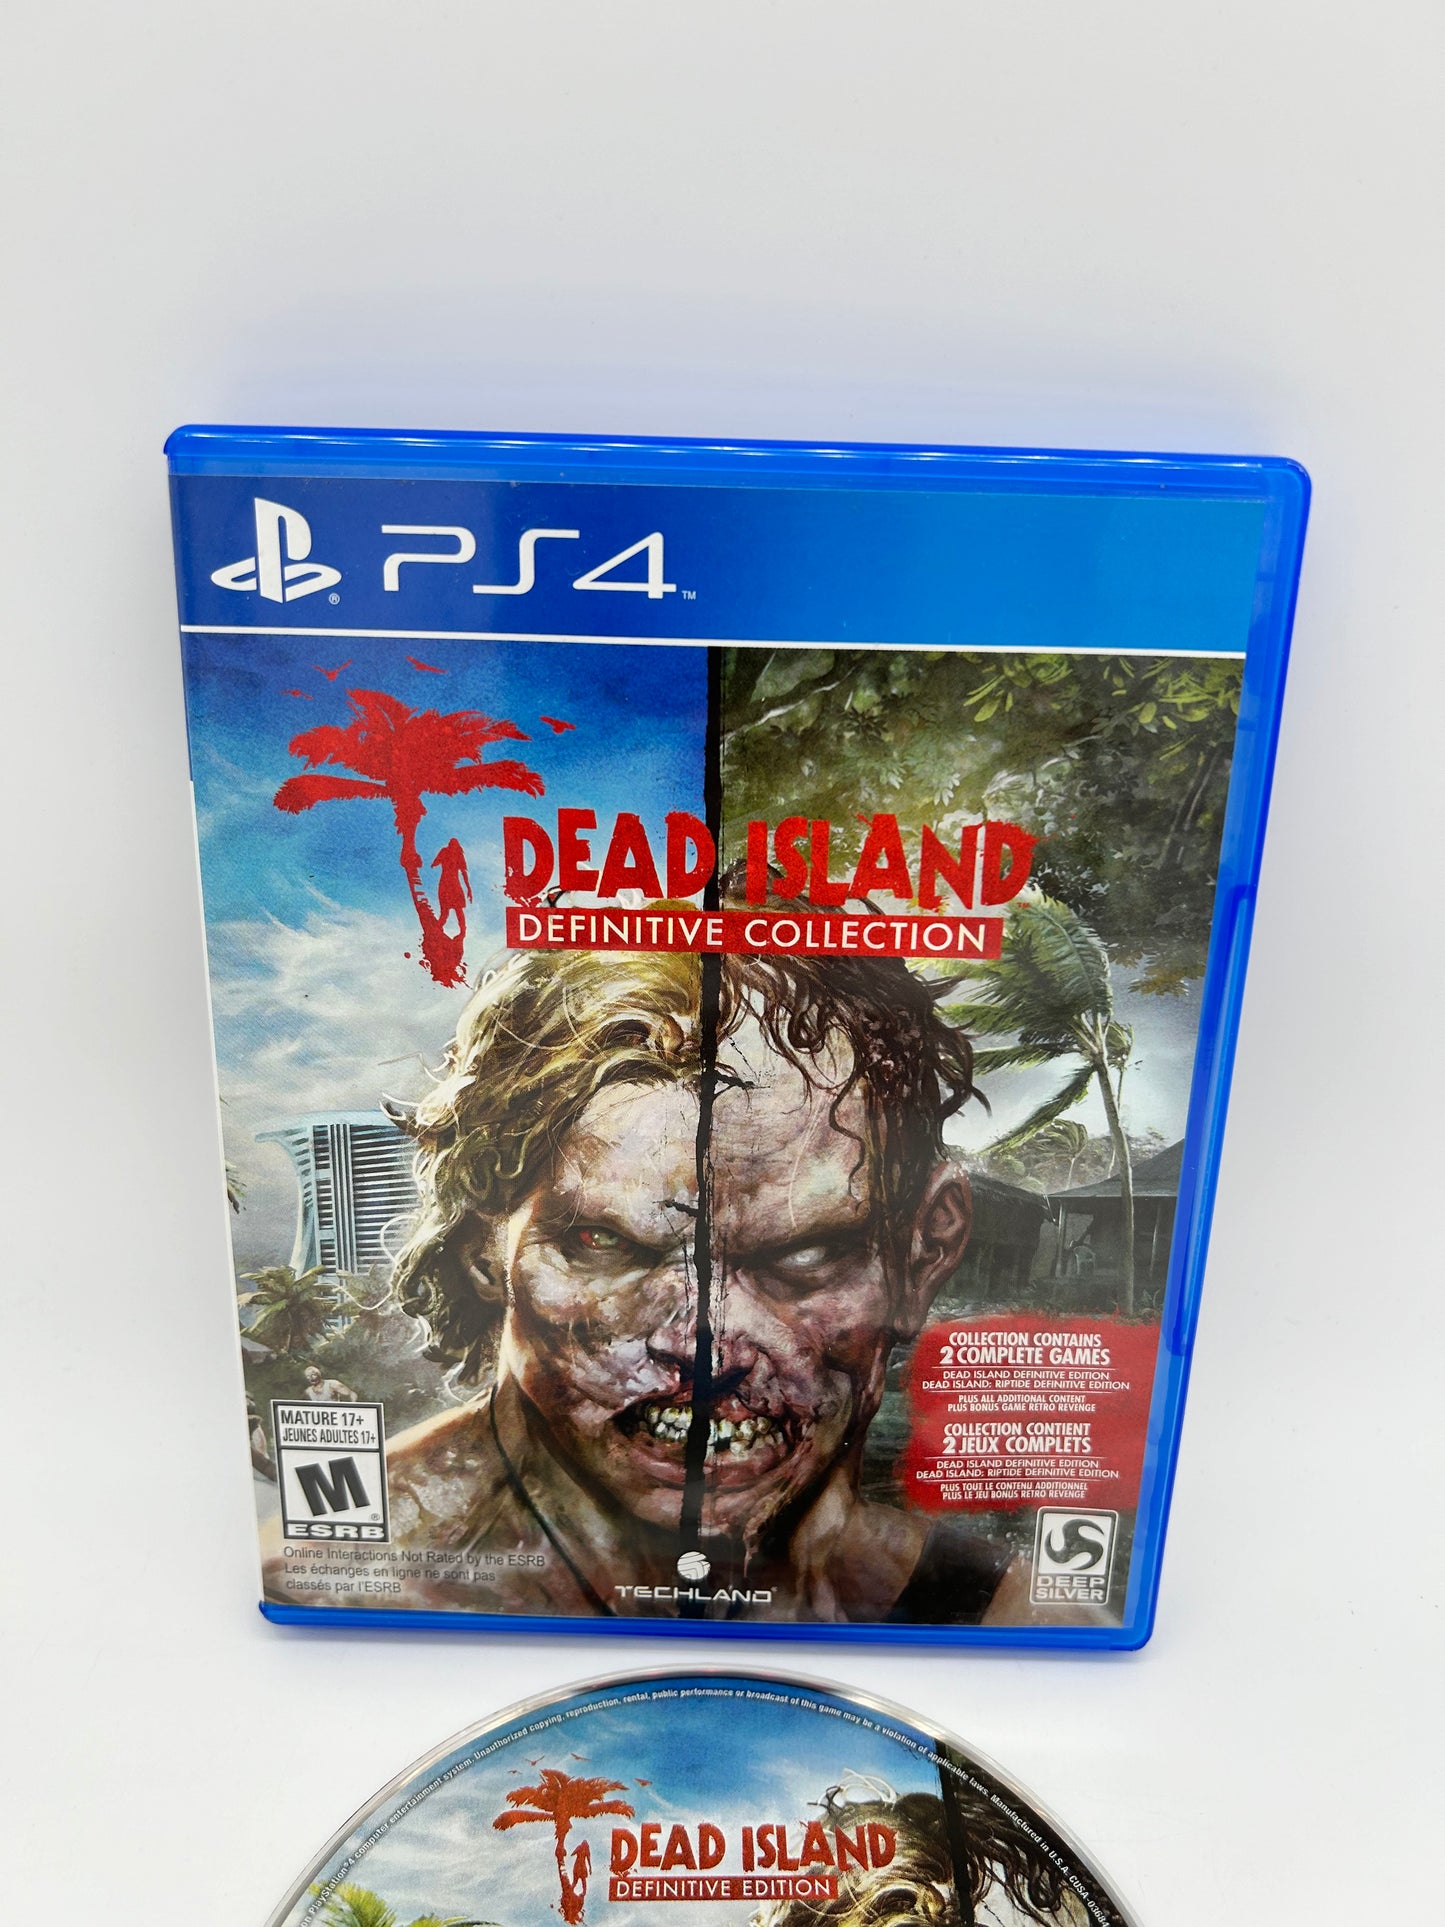 SONY PLAYSTATiON 4 [PS4] | DEAD iSLAND | DEFiNiTiVE COLLECTiON